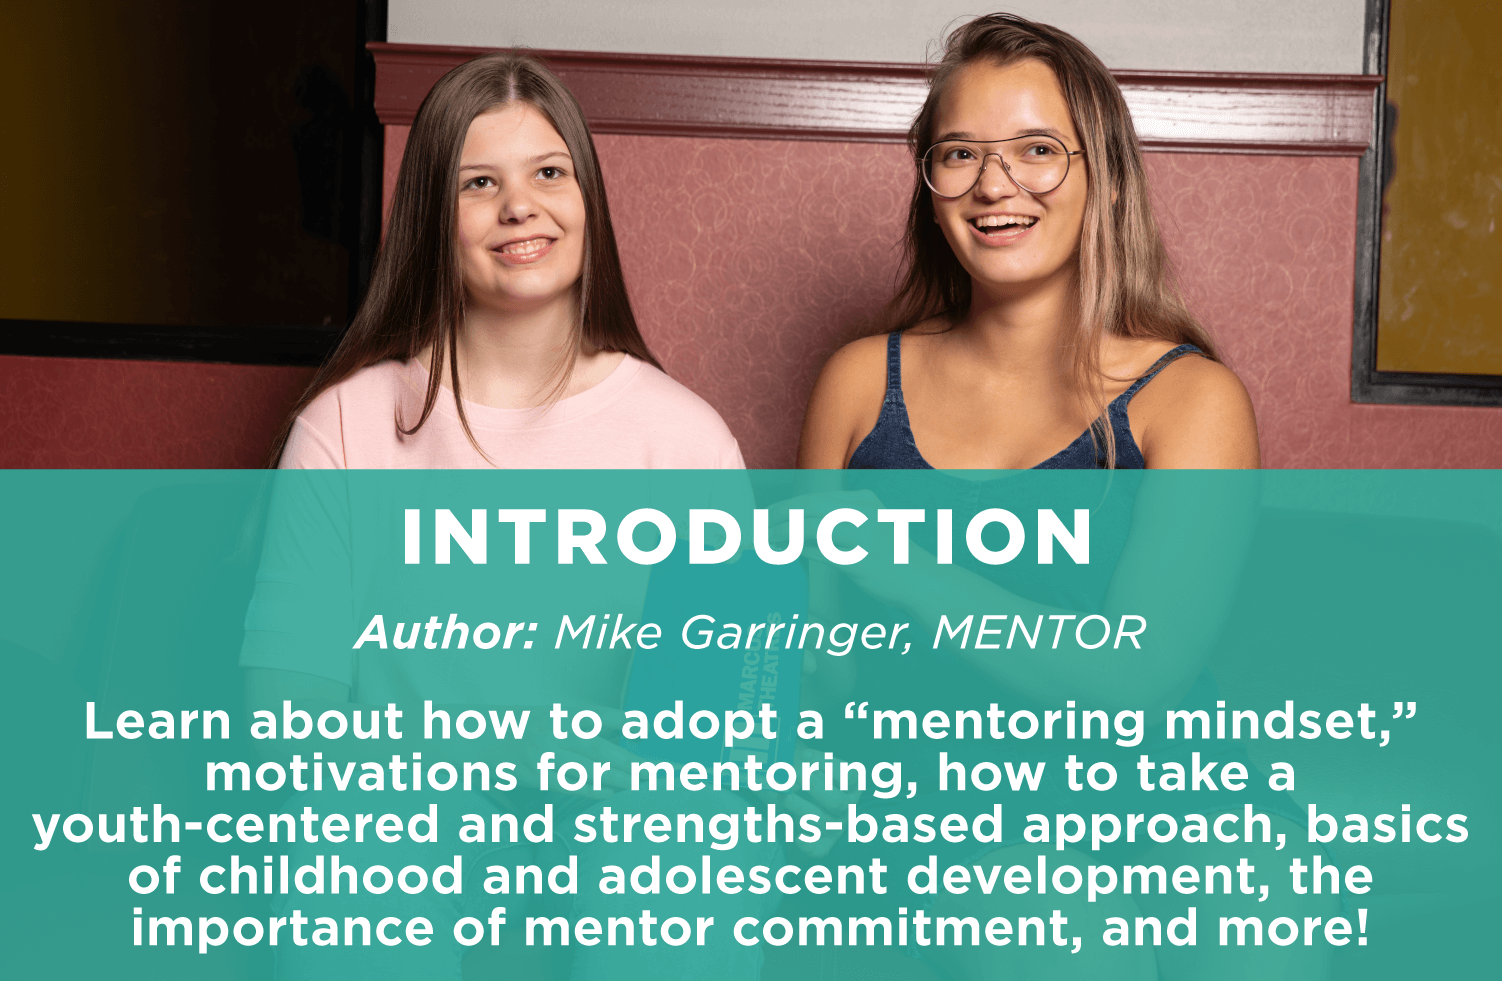 Introduction
Author: Mike Garringer, MENTOR
Learn about how to adopt a “mentoring mindset,” motivations for mentoring, how to take a youth-centered and strengths-based approach, basics of childhood and adolescent development, the importance of mentor commitment, and more!